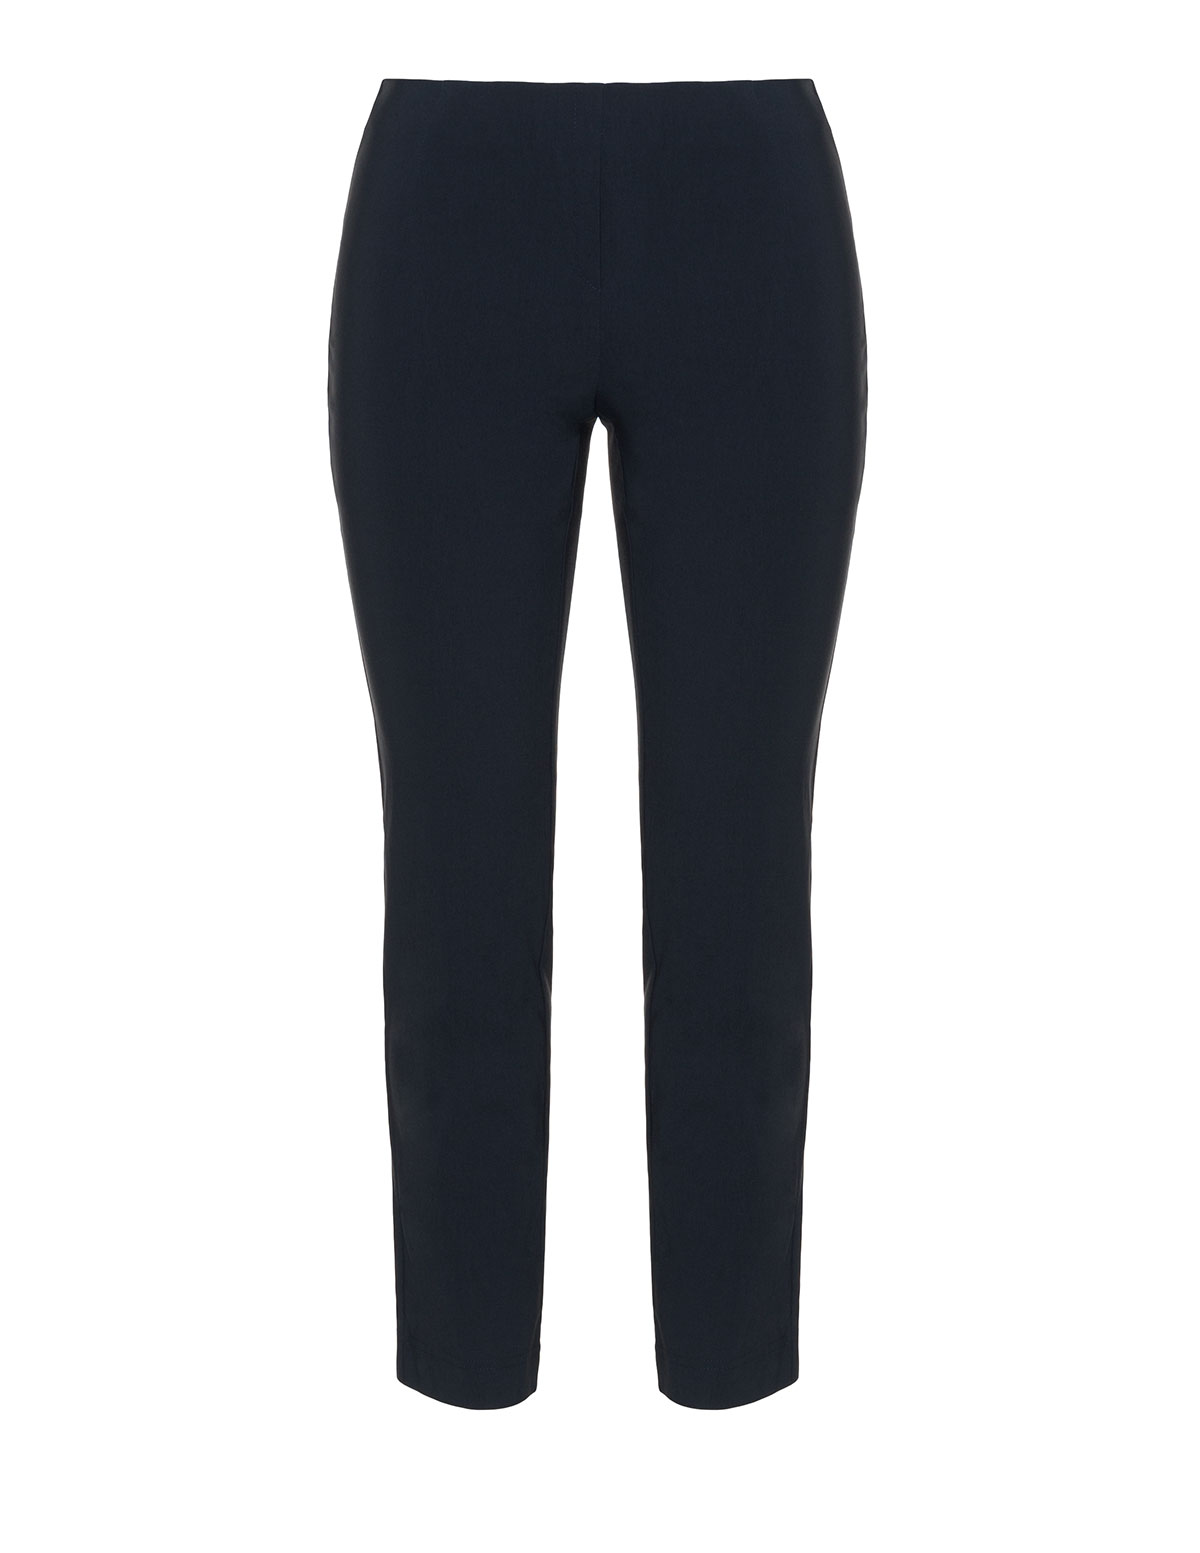 Helen Shape Collection trousers by
Manon Baptiste